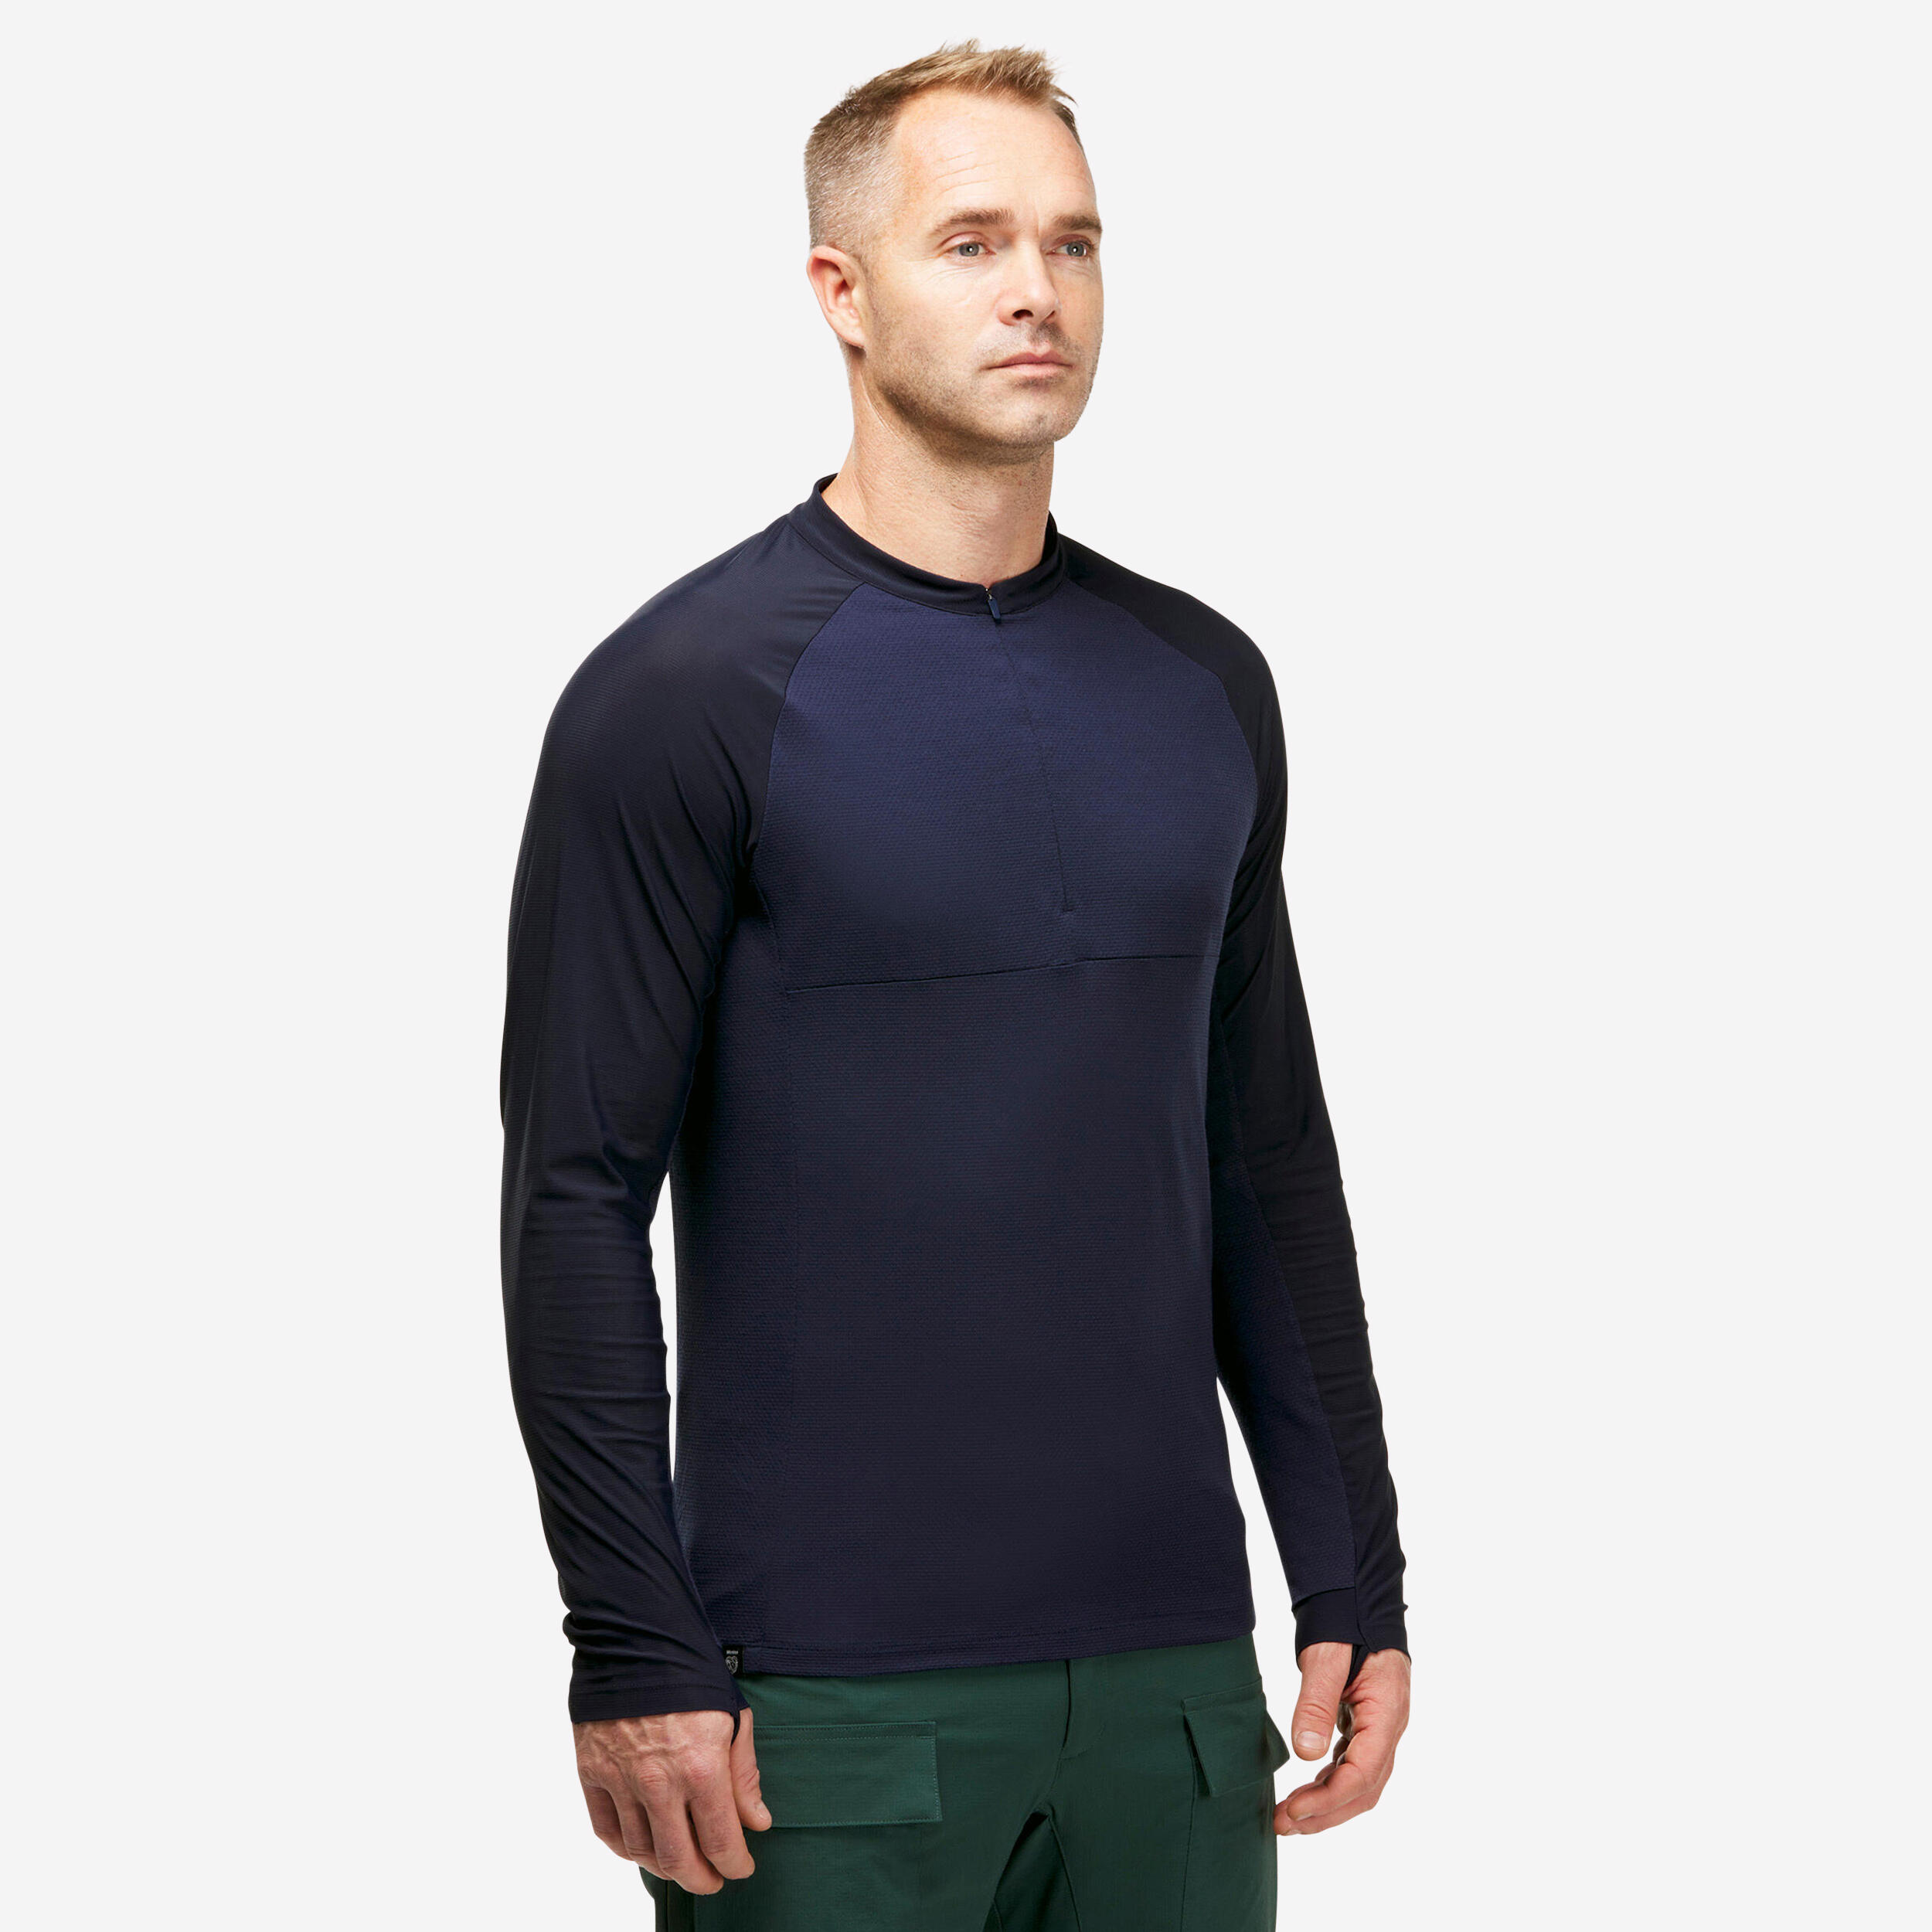 Buy Gap Breathable Thumb Hole Long Sleeve Turtle Neck T-Shirt from